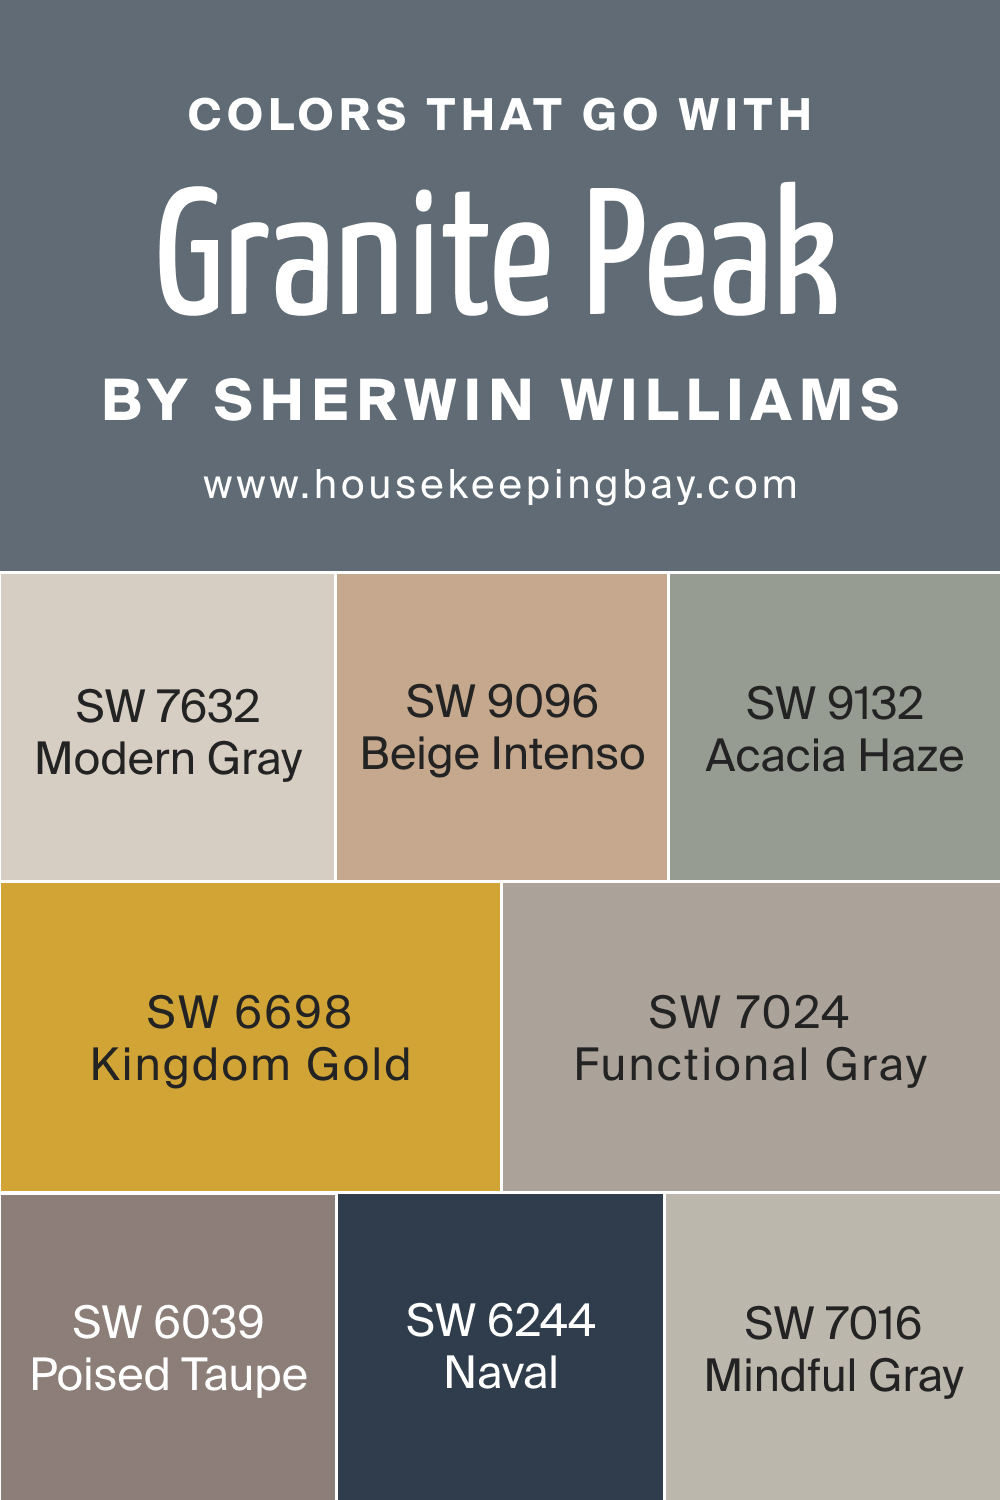 Colors that goes with SW 6250 Granite Peak by Sherwin Williams